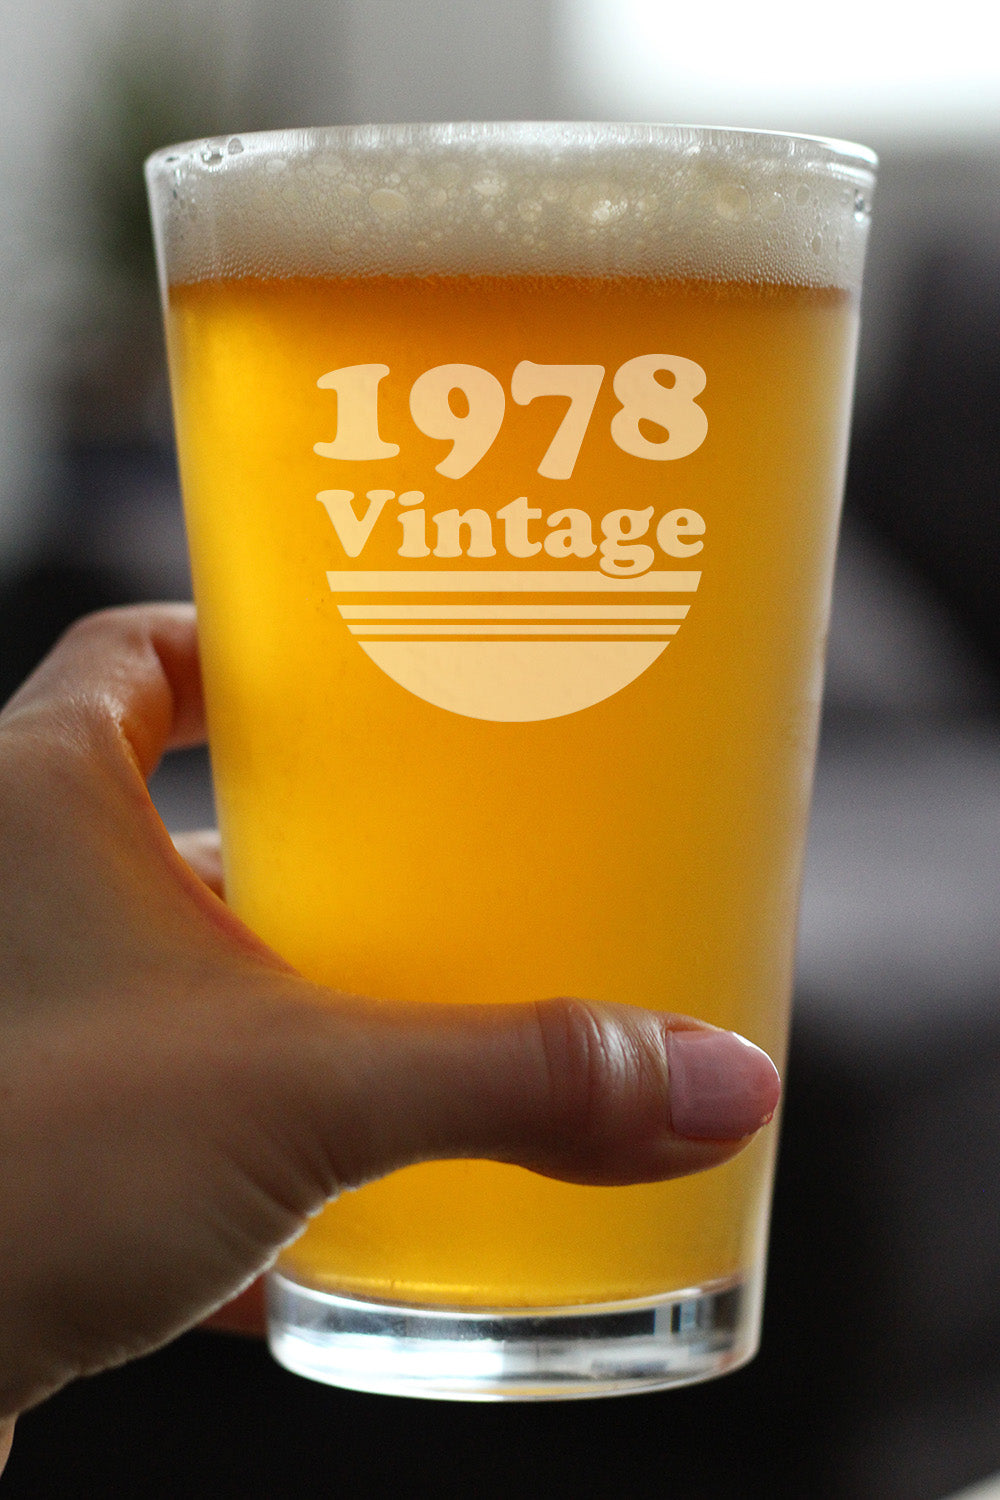 Vintage 1978 - Pint Glass for Beer - 45th Birthday Gifts for Men or Women Turning 45 - Fun Bday Party Decor - 16 oz